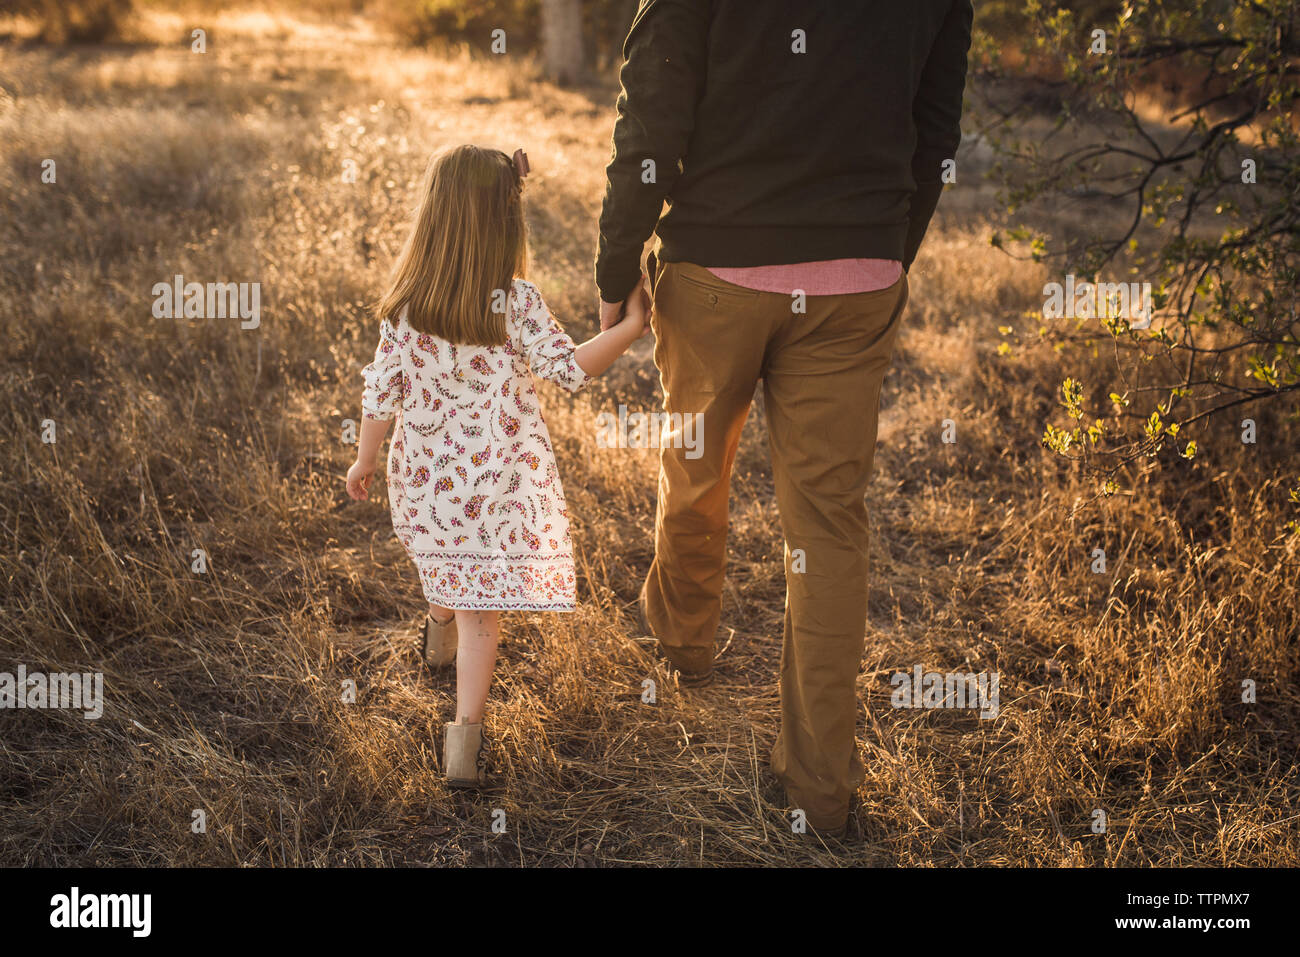 Father and daughter walking holding hands in California field Stock Photo